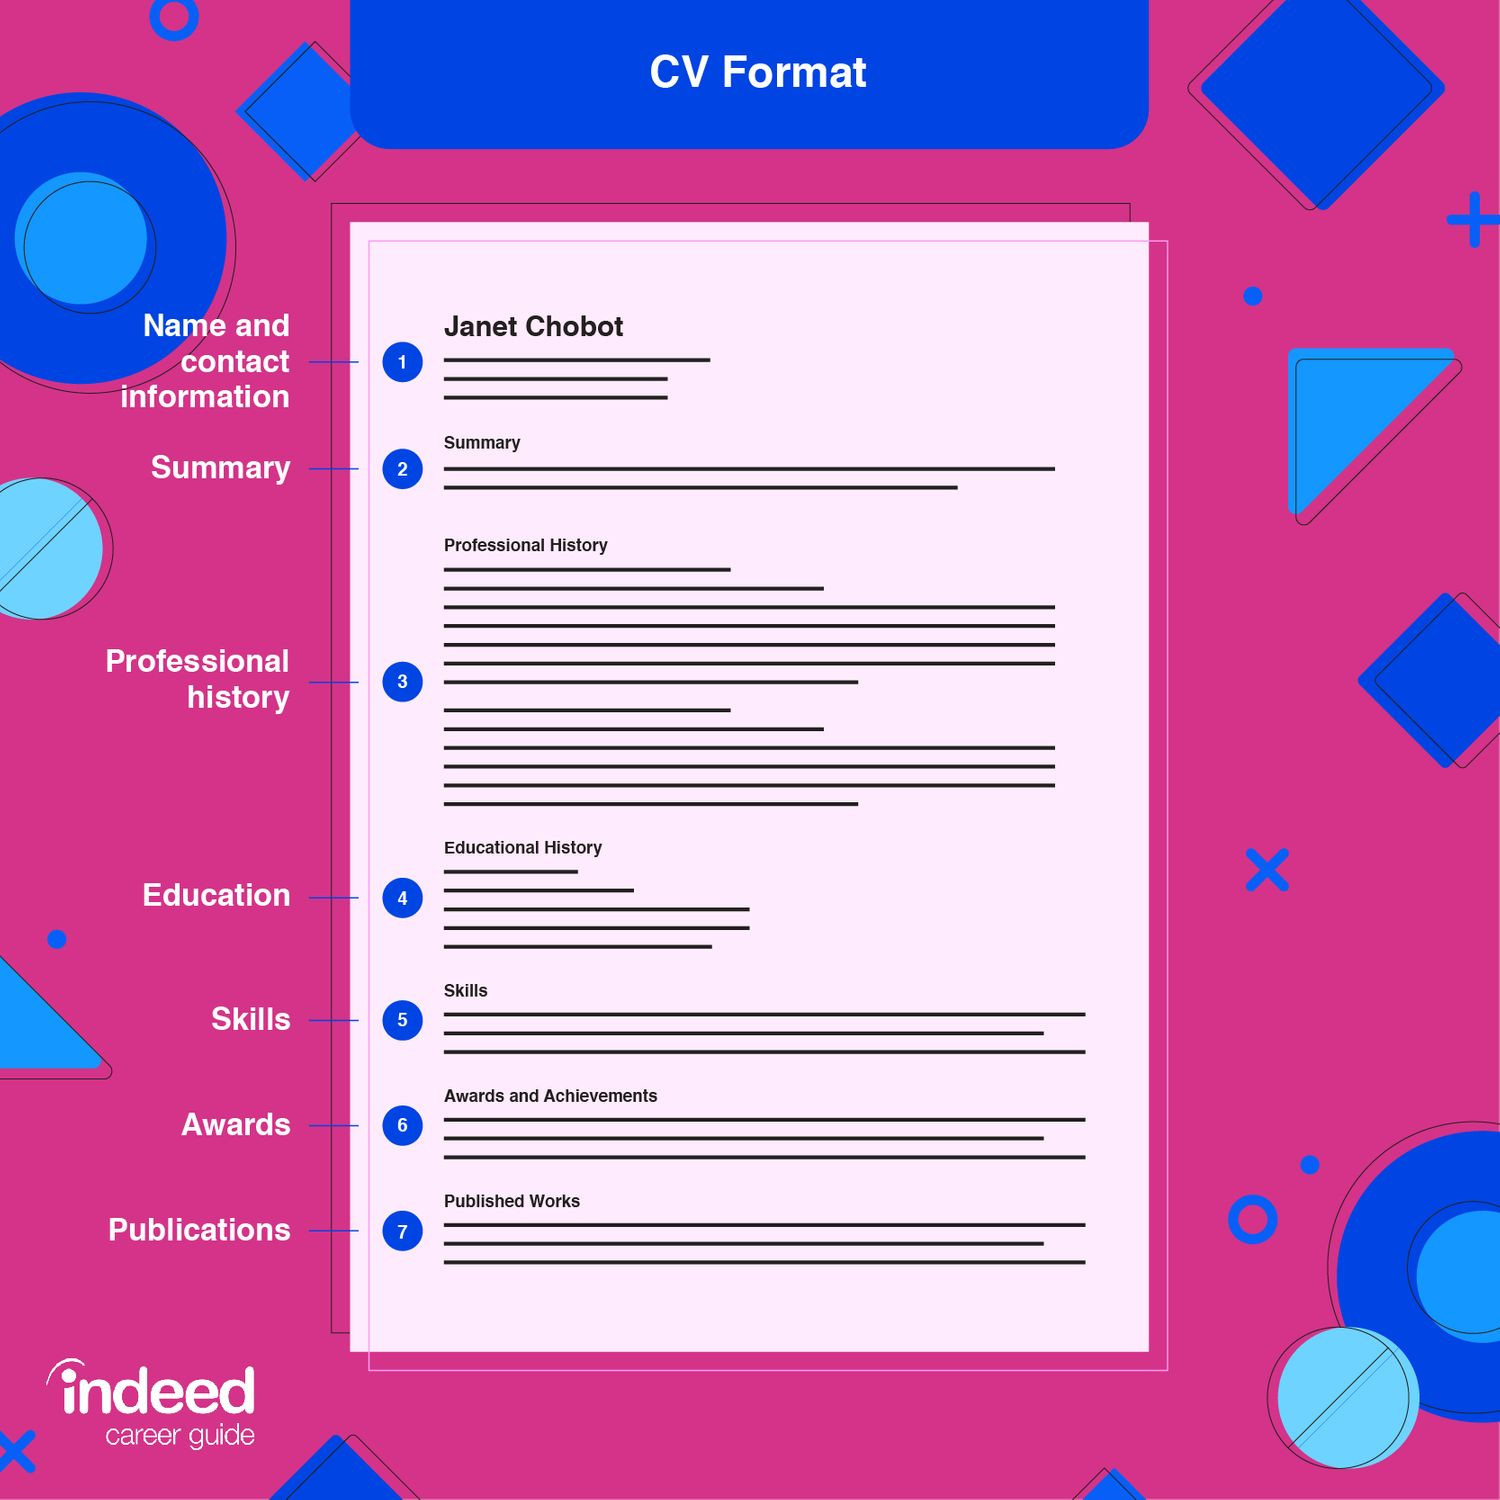 Indeed Sample Resume for High School Student Cv Examples for Students (with How-to, Tips and Template) Indeed.com